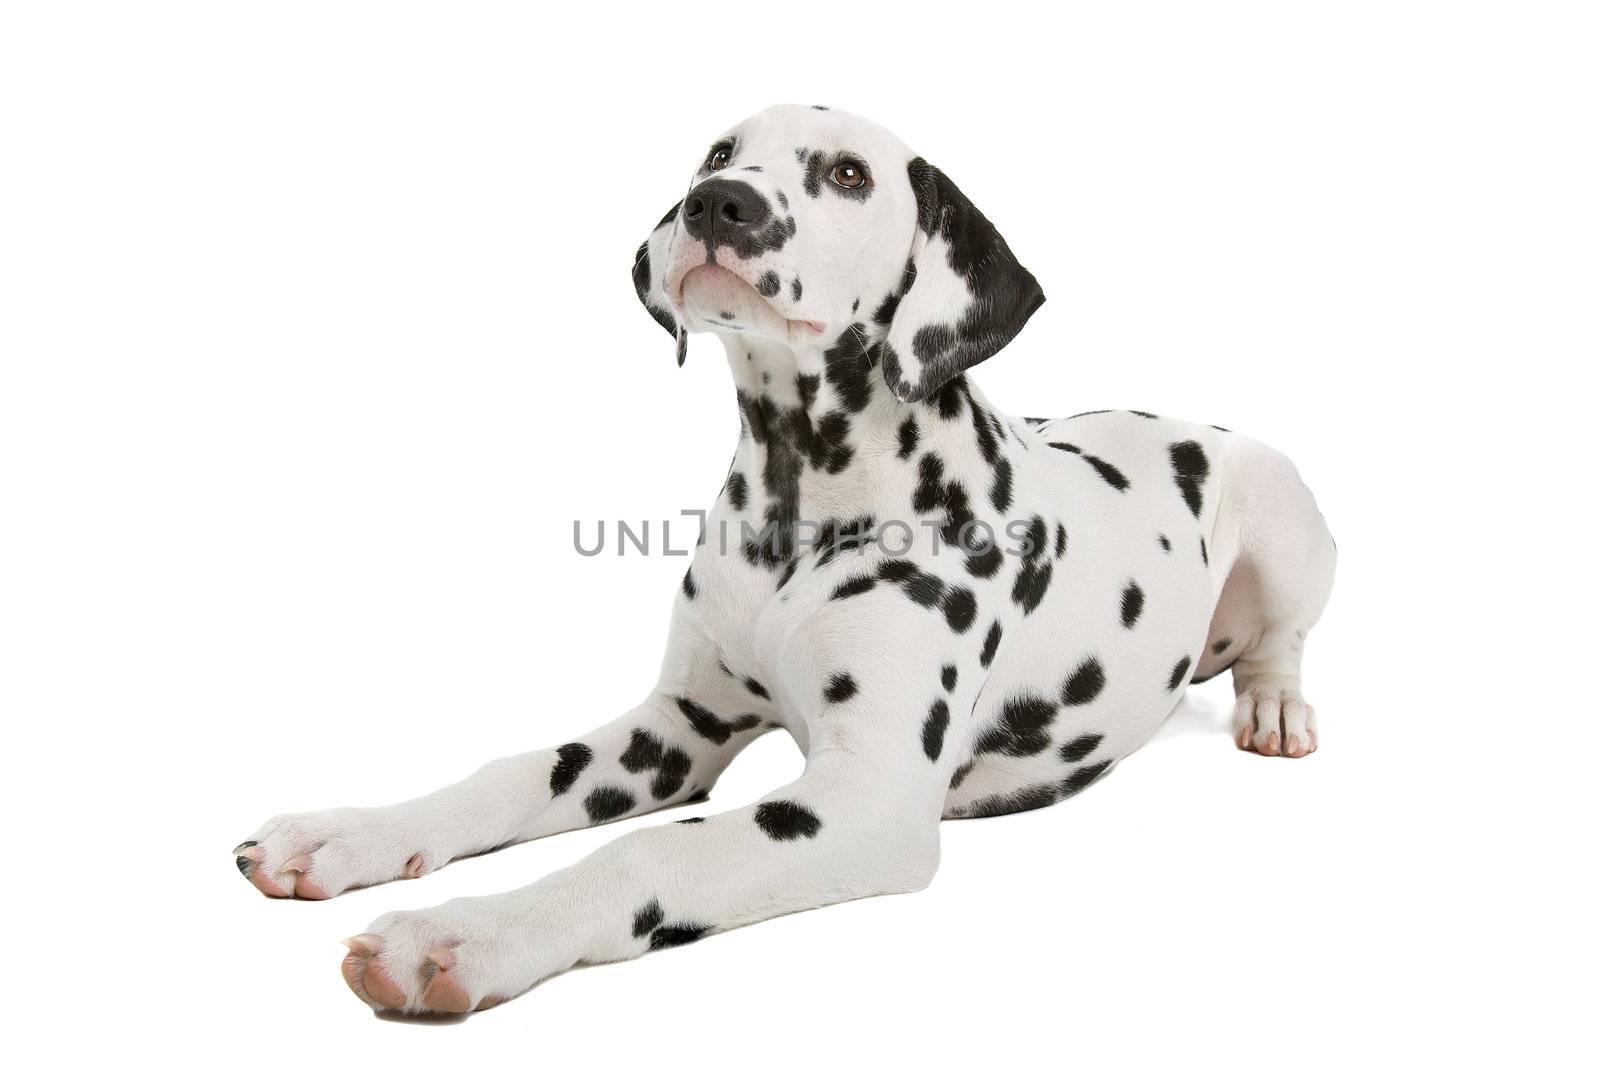 Dalmatian puppy in front of a white background